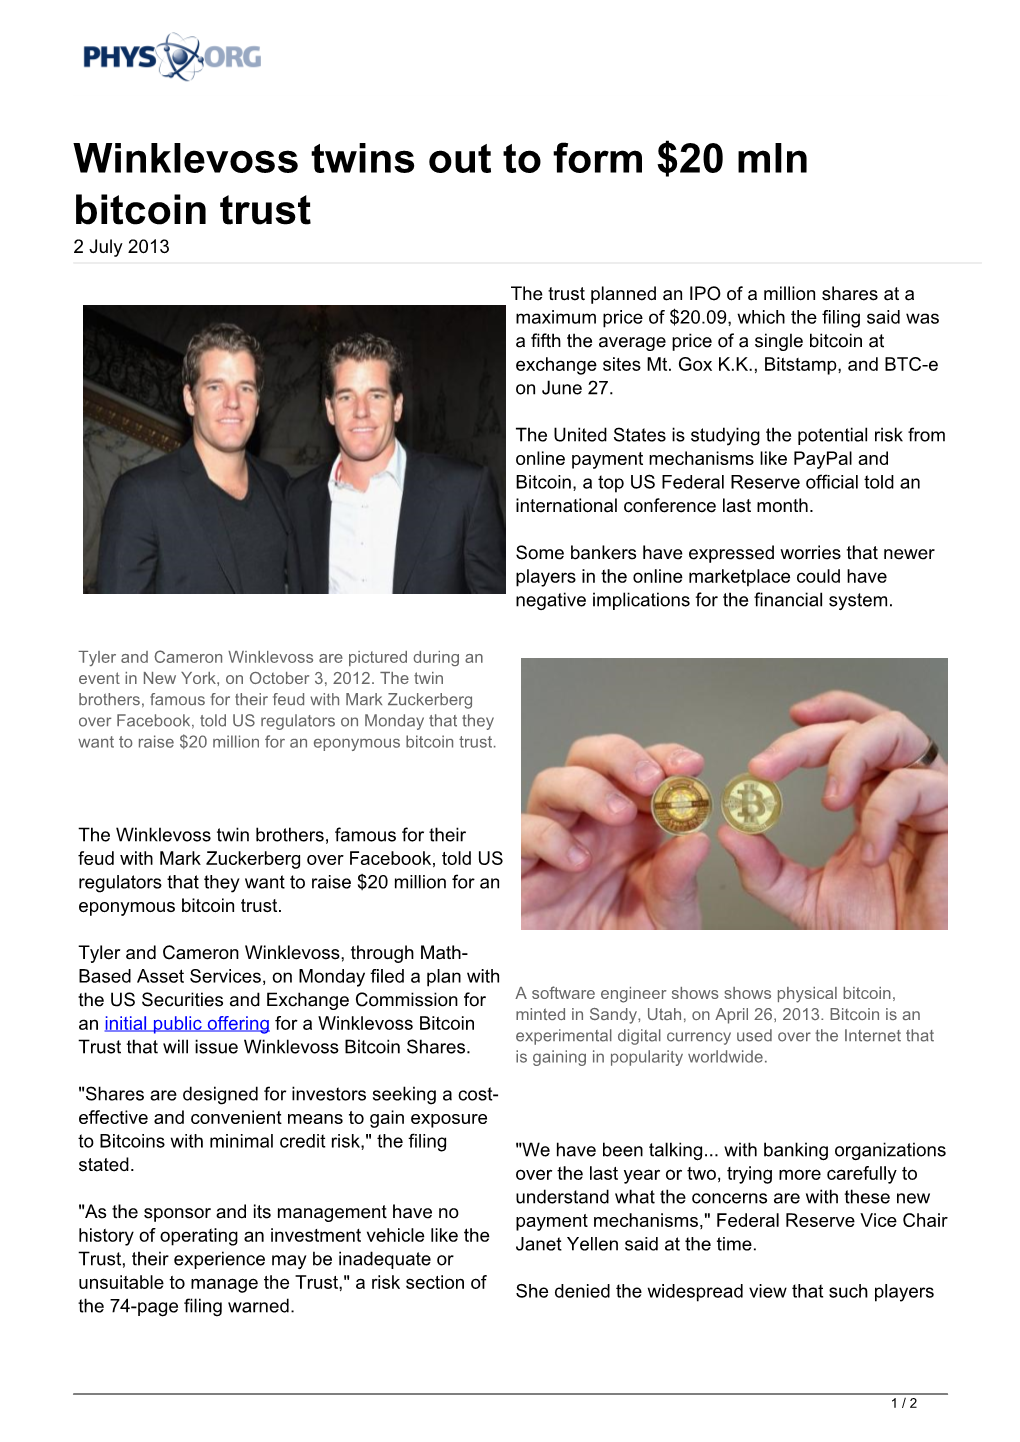 Winklevoss Twins out to Form $20 Mln Bitcoin Trust 2 July 2013